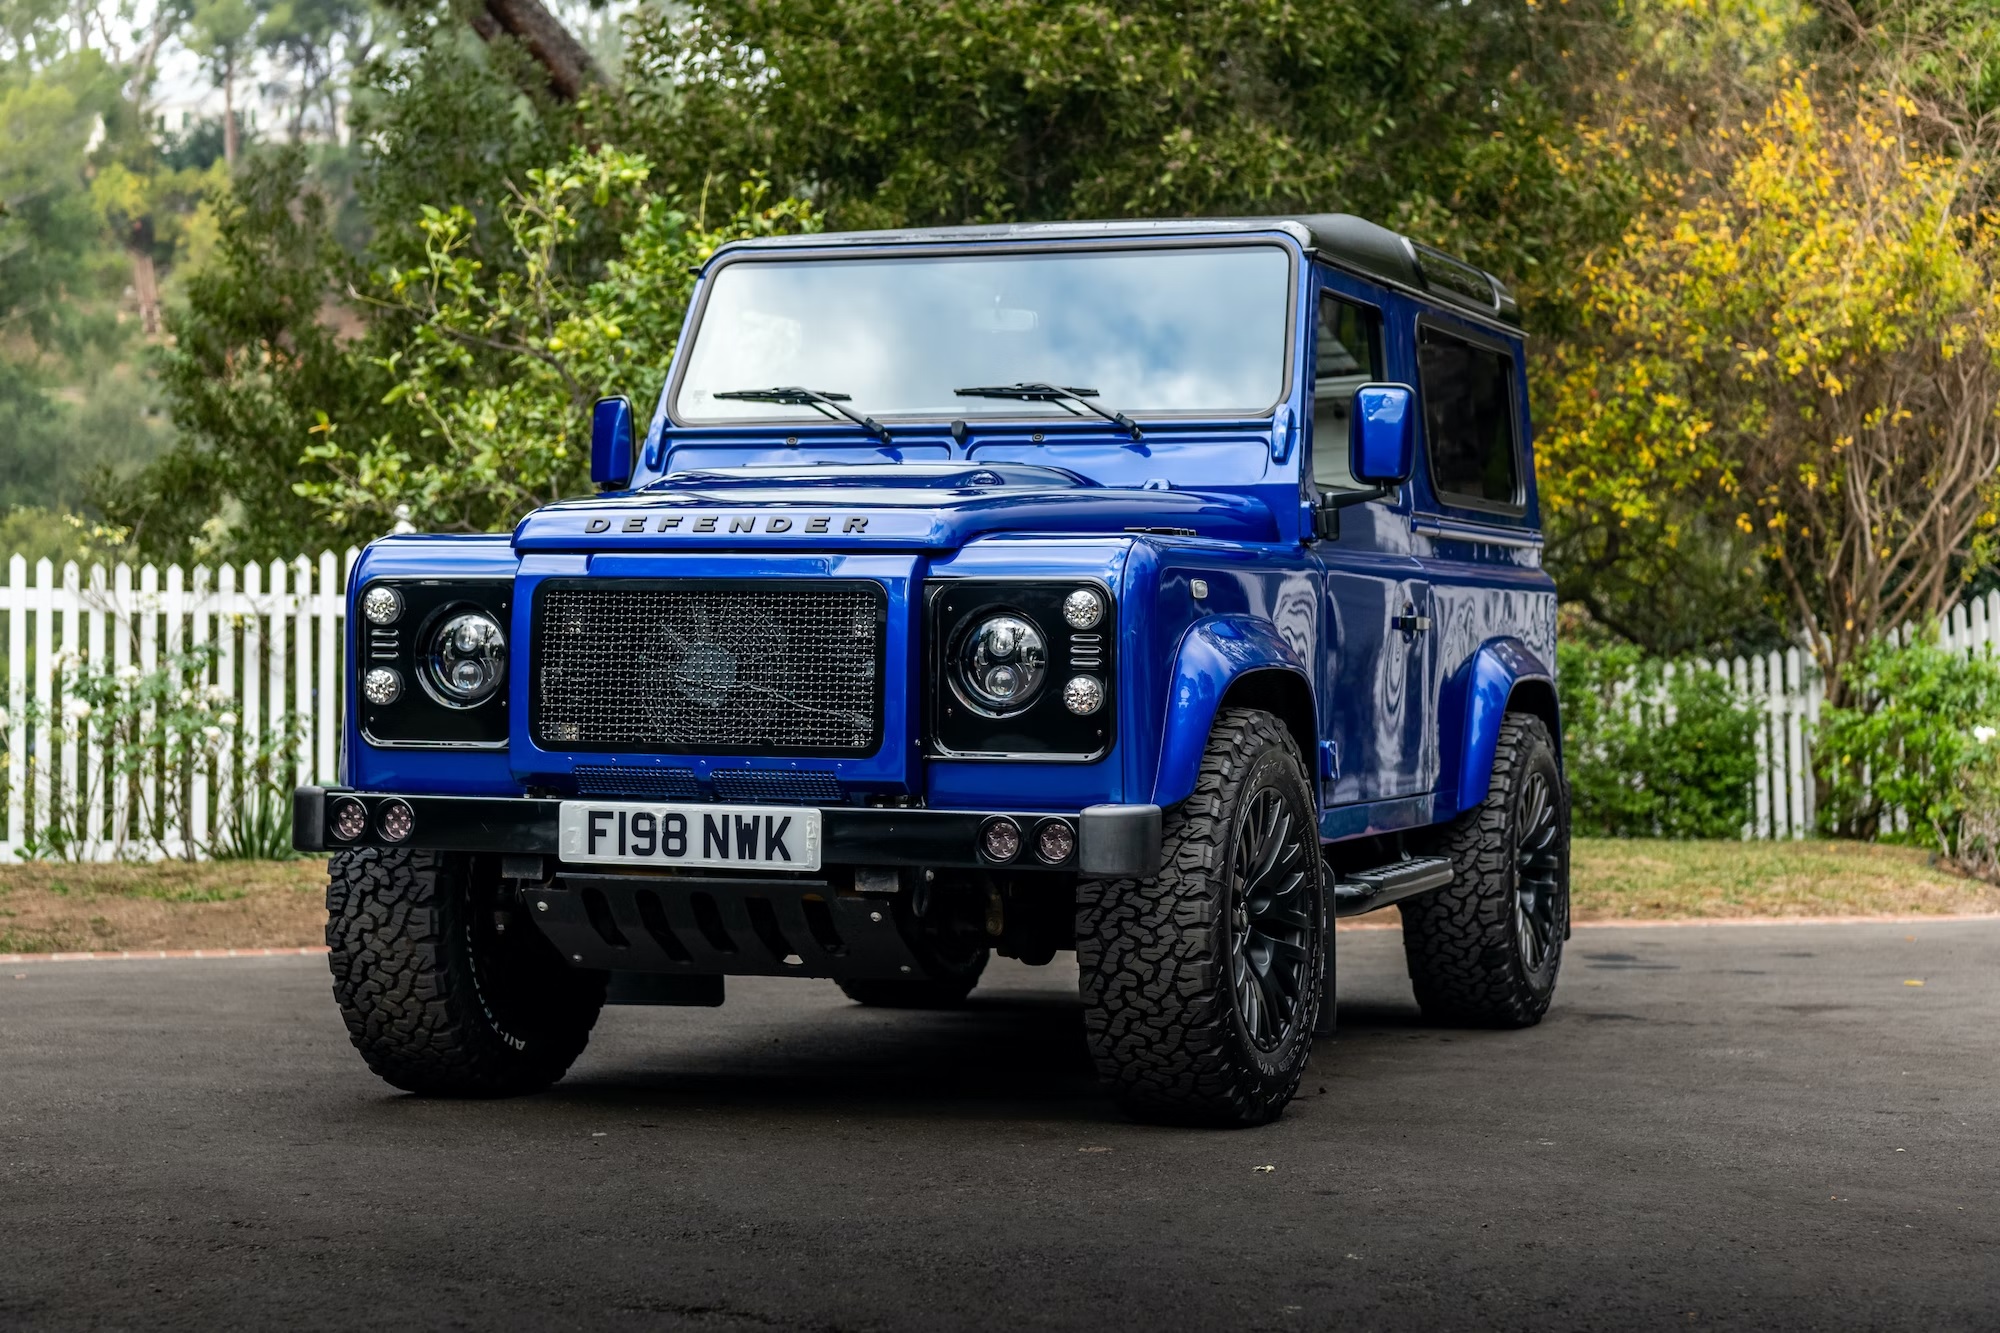 https://s1.cdn.autoevolution.com/images/news/highly-modified-land-rover-defender-90-owned-by-jenson-button-is-up-for-auction-206607_1.jpg